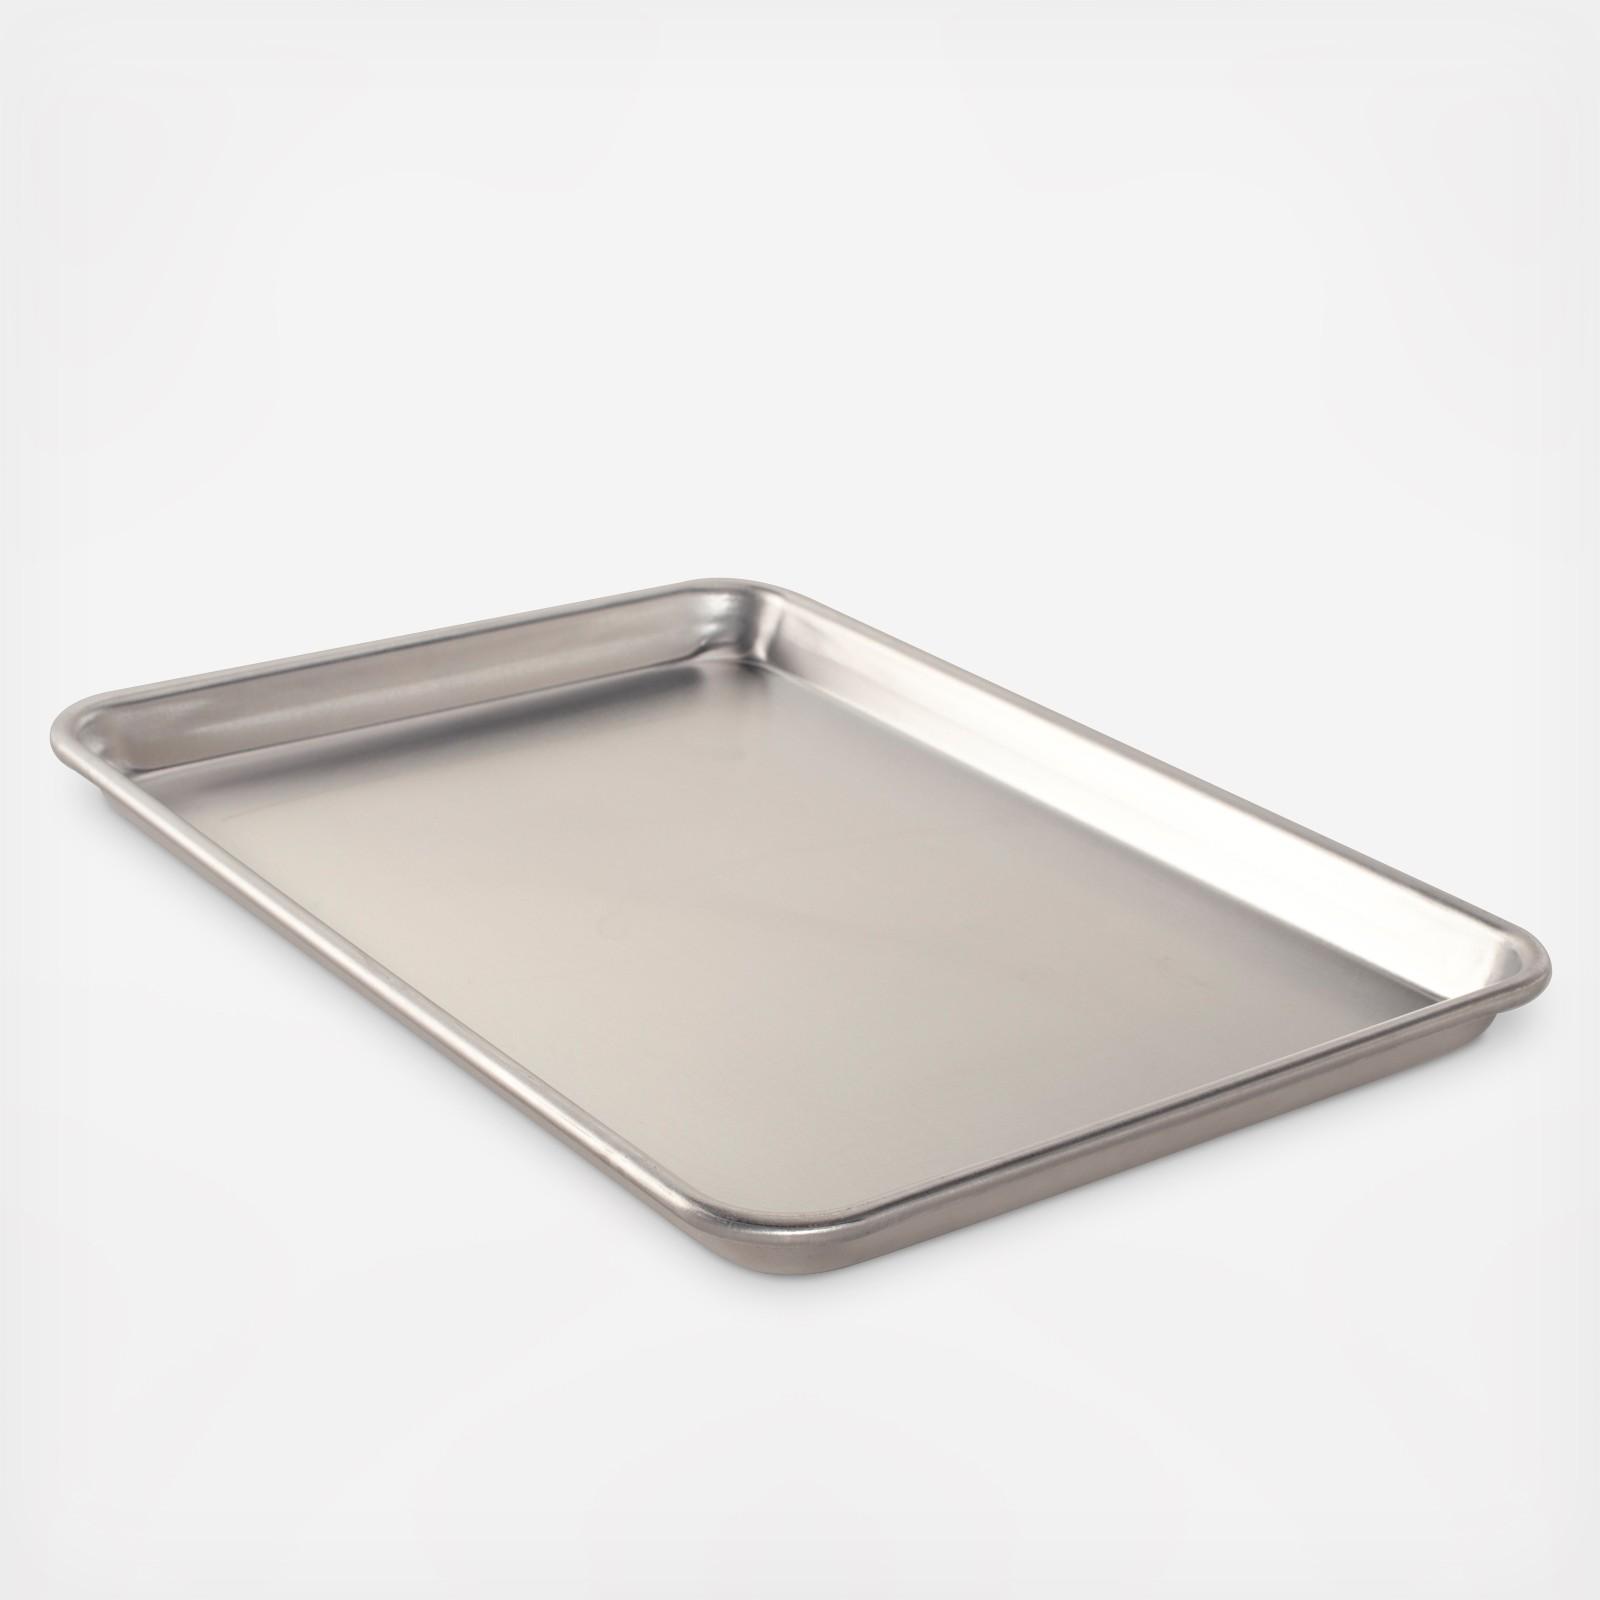 Nordic Ware Natural Jelly Roll Pan &, fits all standard Big Extra Large  Baking Sheet Pan, Silver